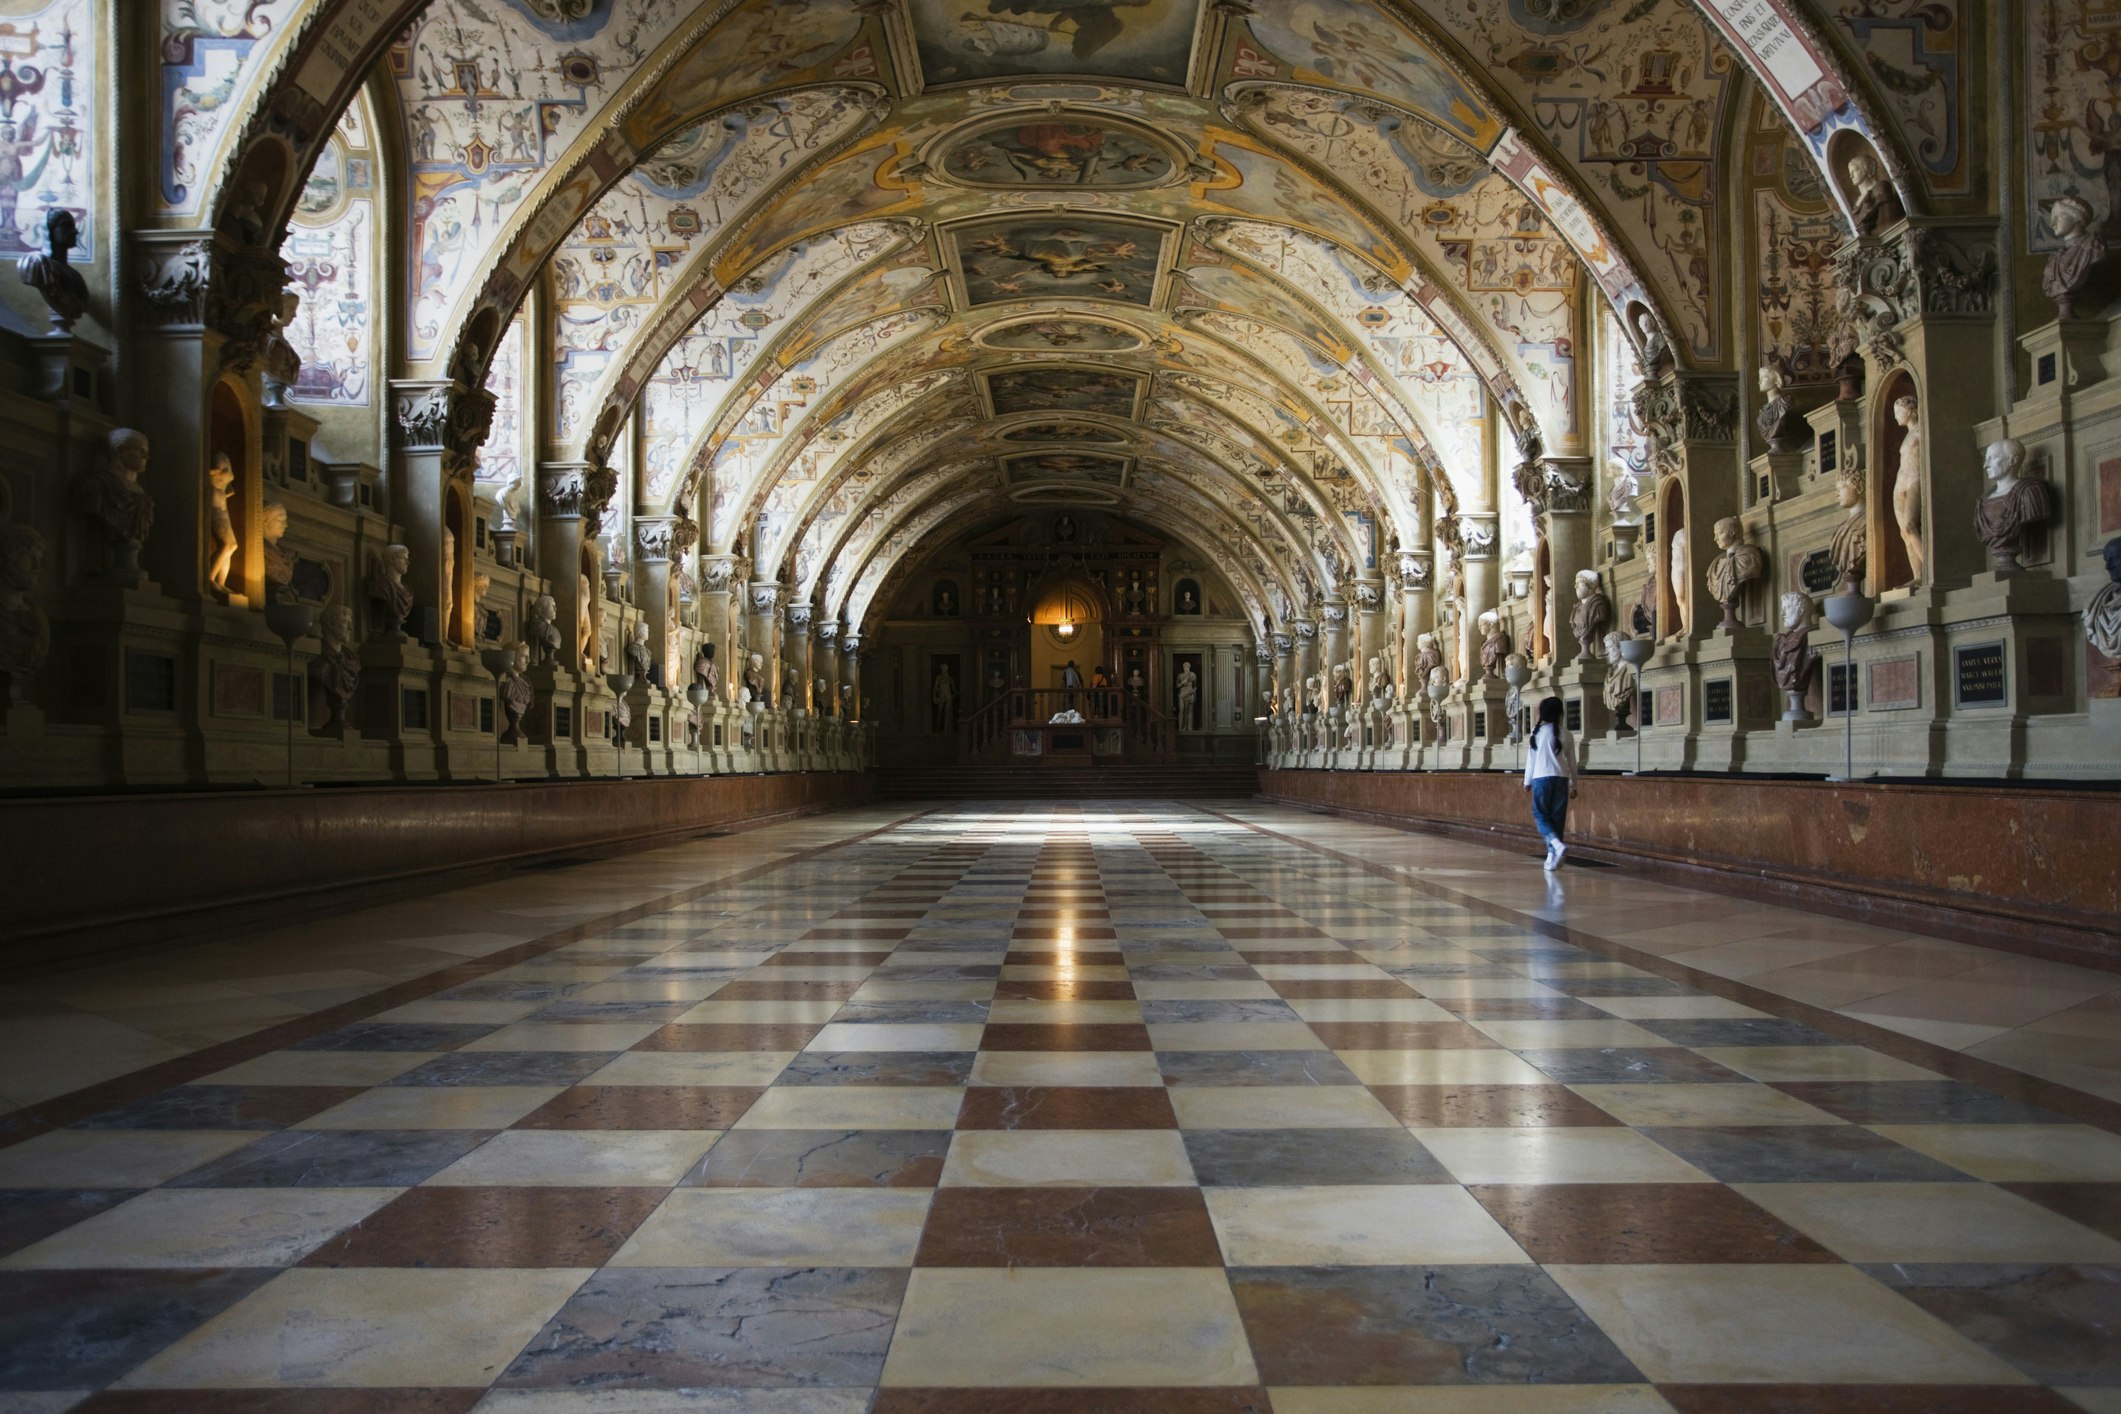 A long wide hallway with a checked tiled floor. The vaulted ceiling is covered in paintings